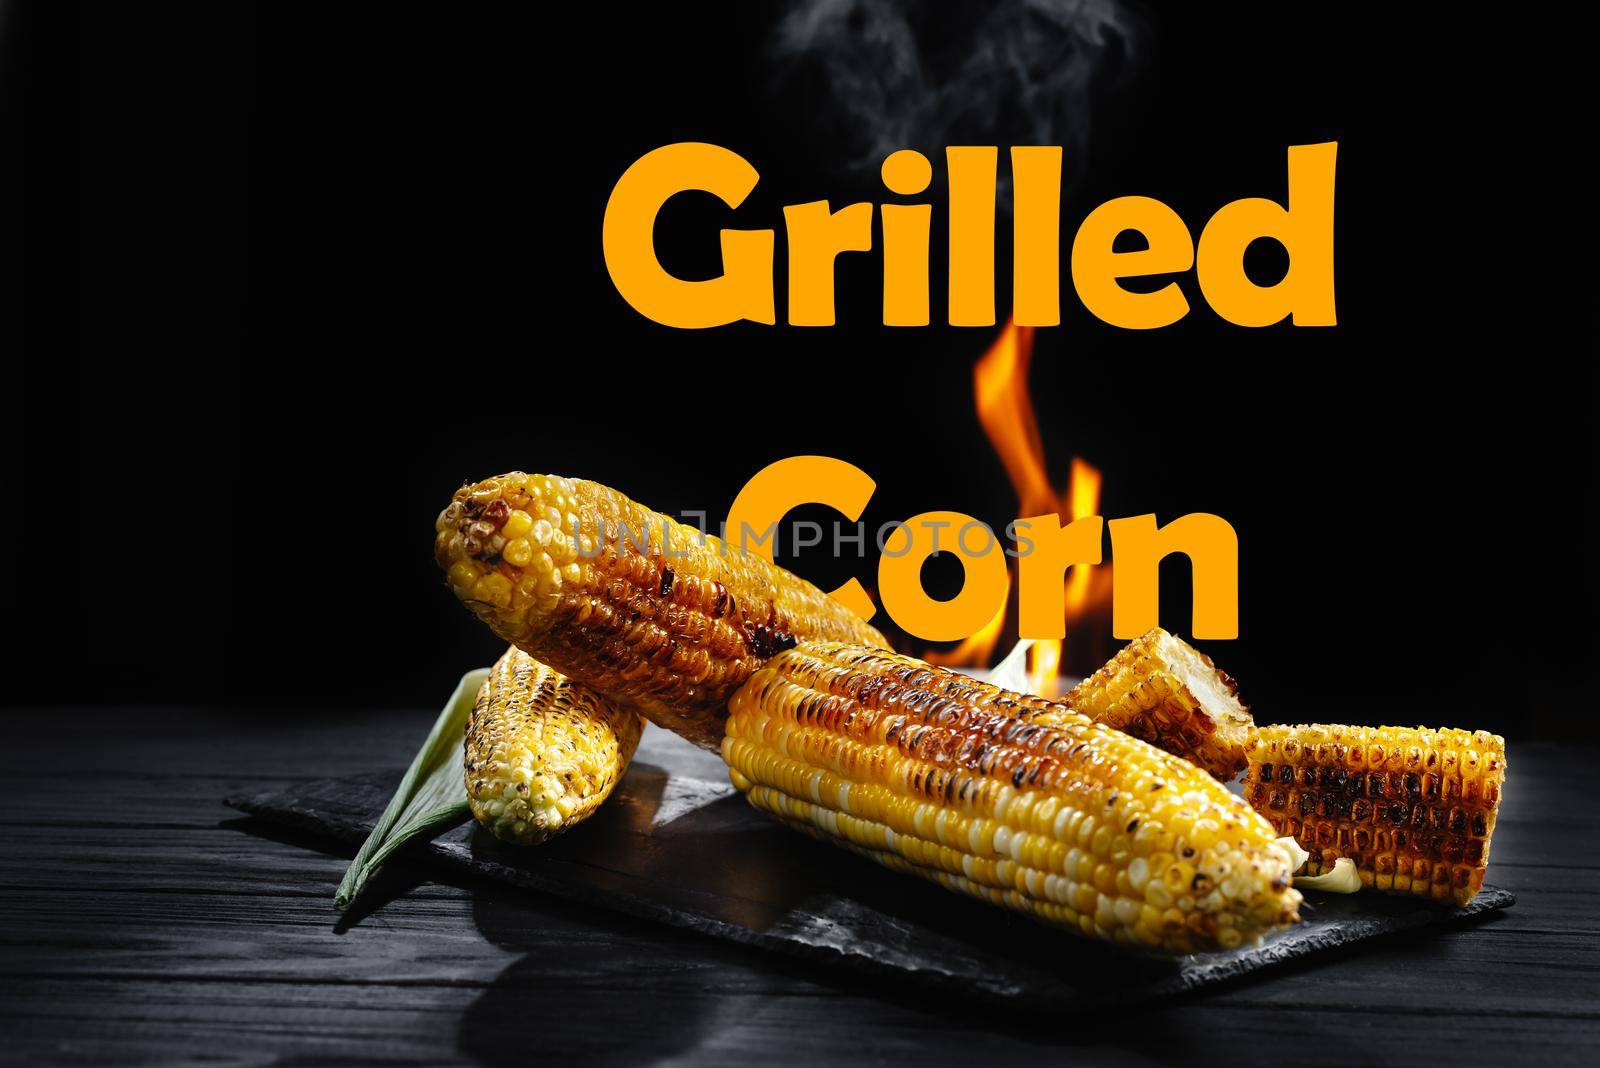 Corn cob on the grill with smoke and flames against a black backdrop. Grilled corn inscription by gulyaevstudio